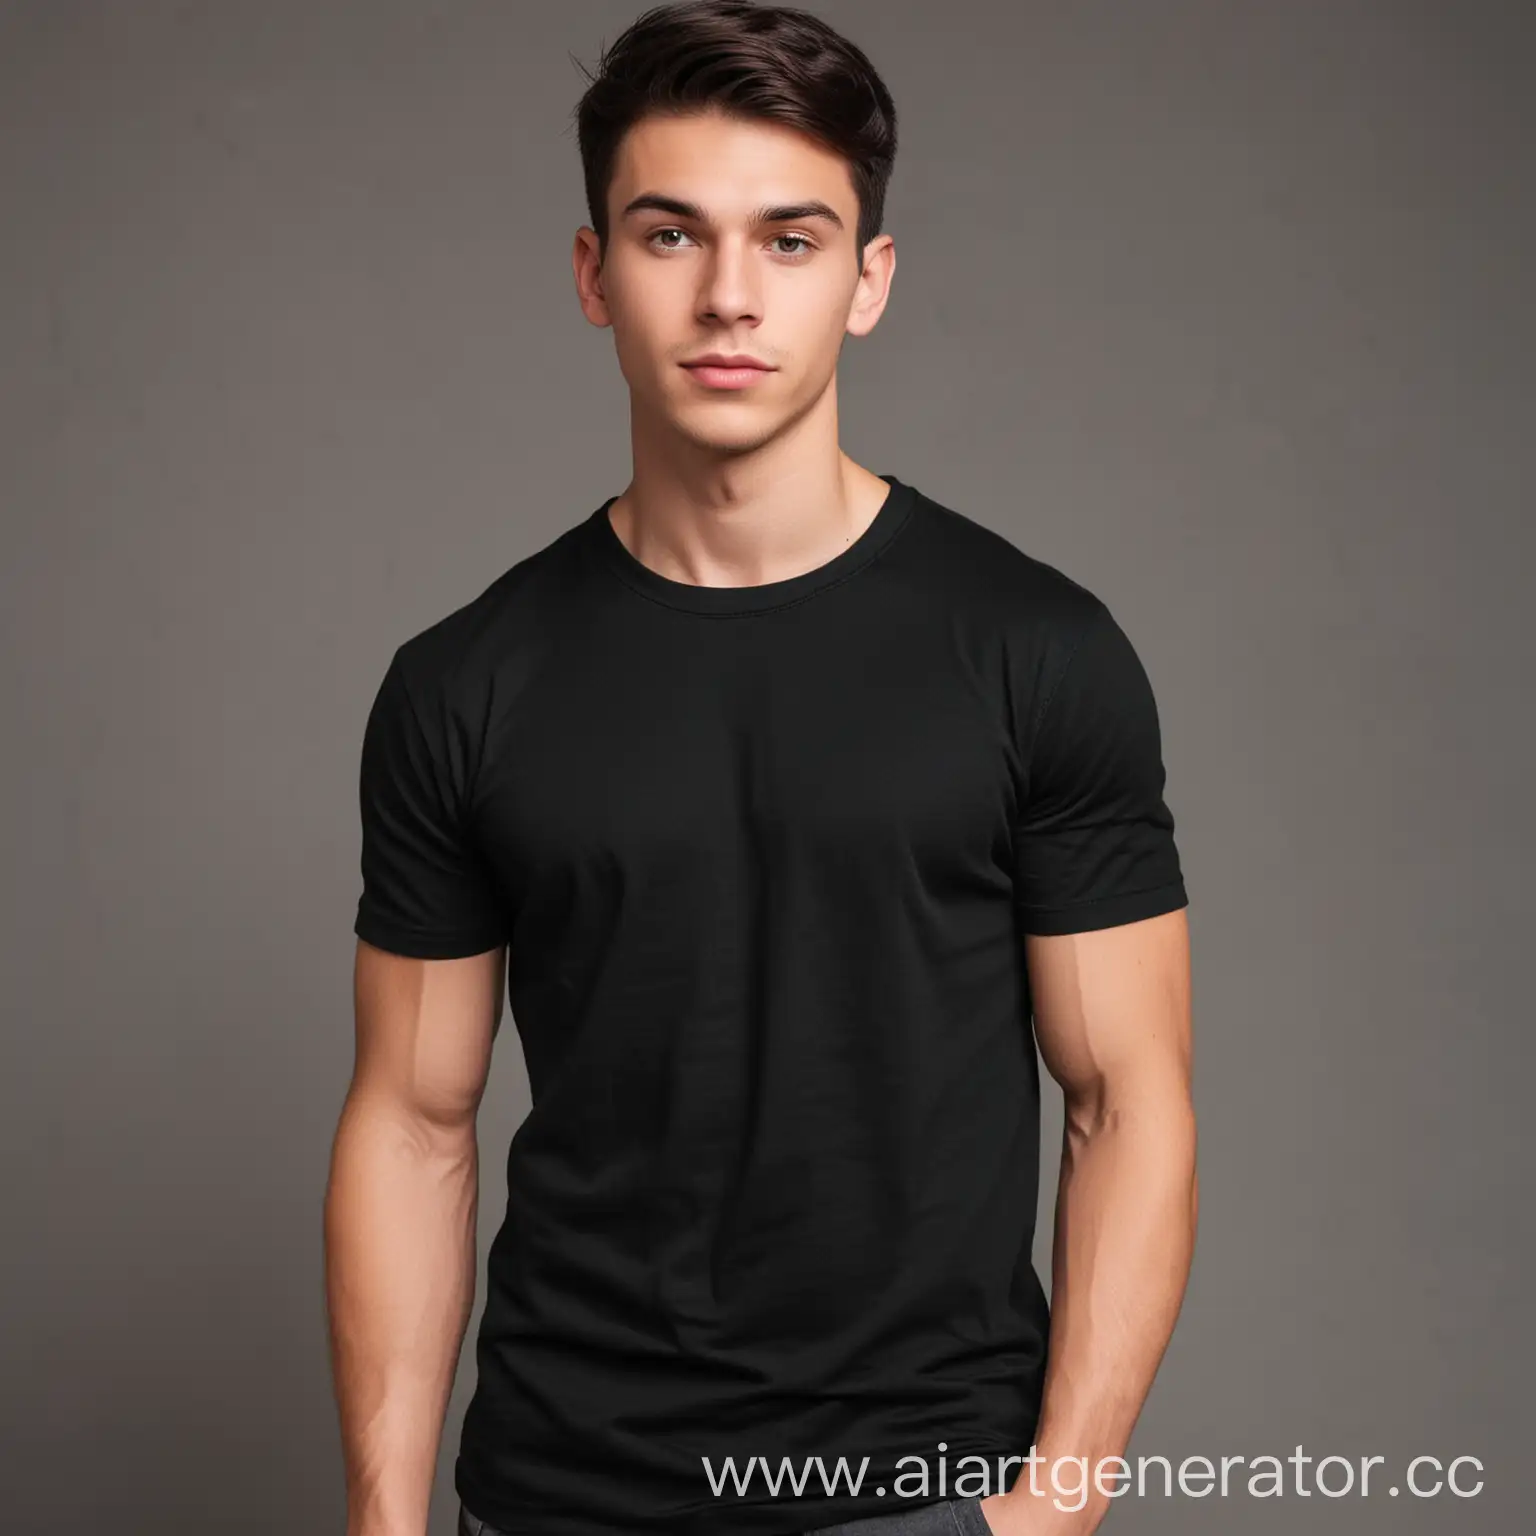 Athletic-Young-Man-in-Black-Cotton-TShirt-Fitness-Portrait